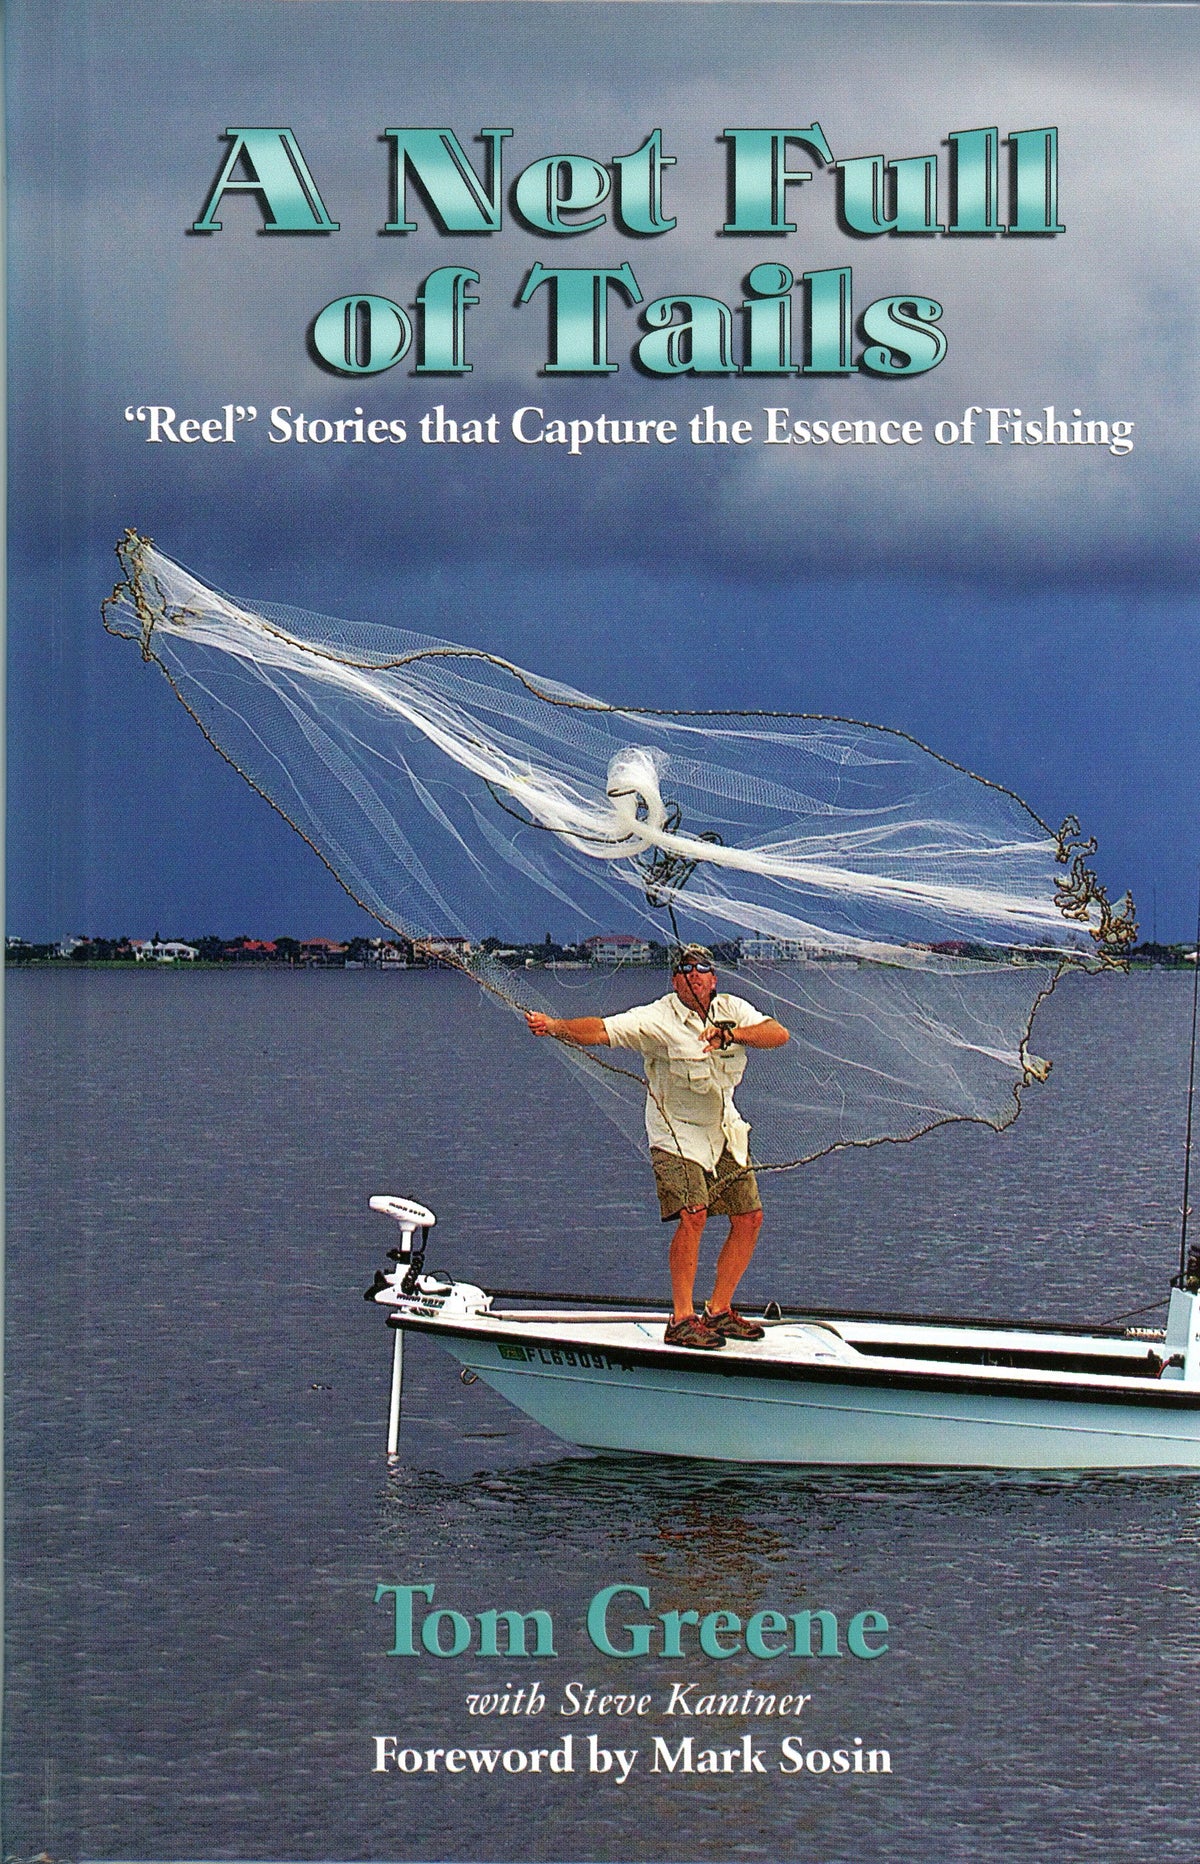 A Net Full of Tails: "Reel" Stories that Capture the Essence of Fishing